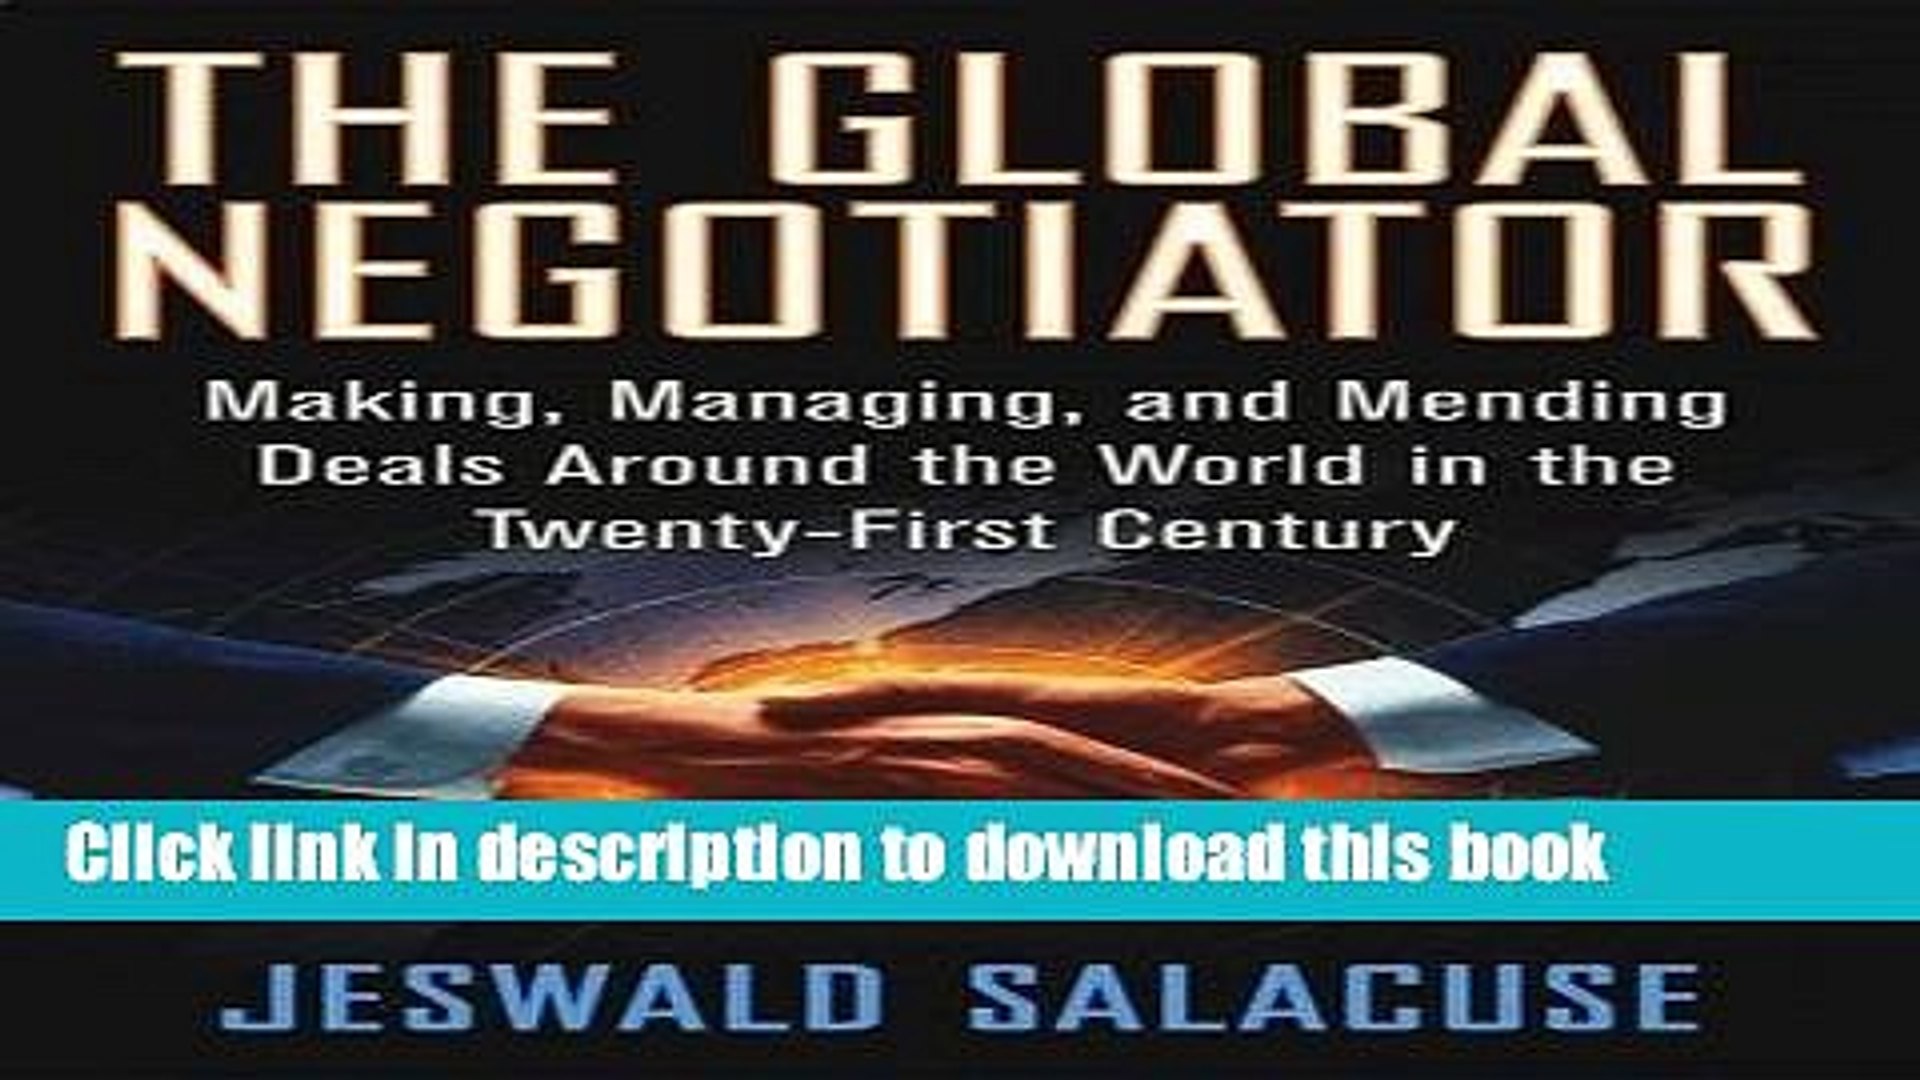 [Popular] The Global Negotiator: Making, Managing and Mending Deals Around the World in the